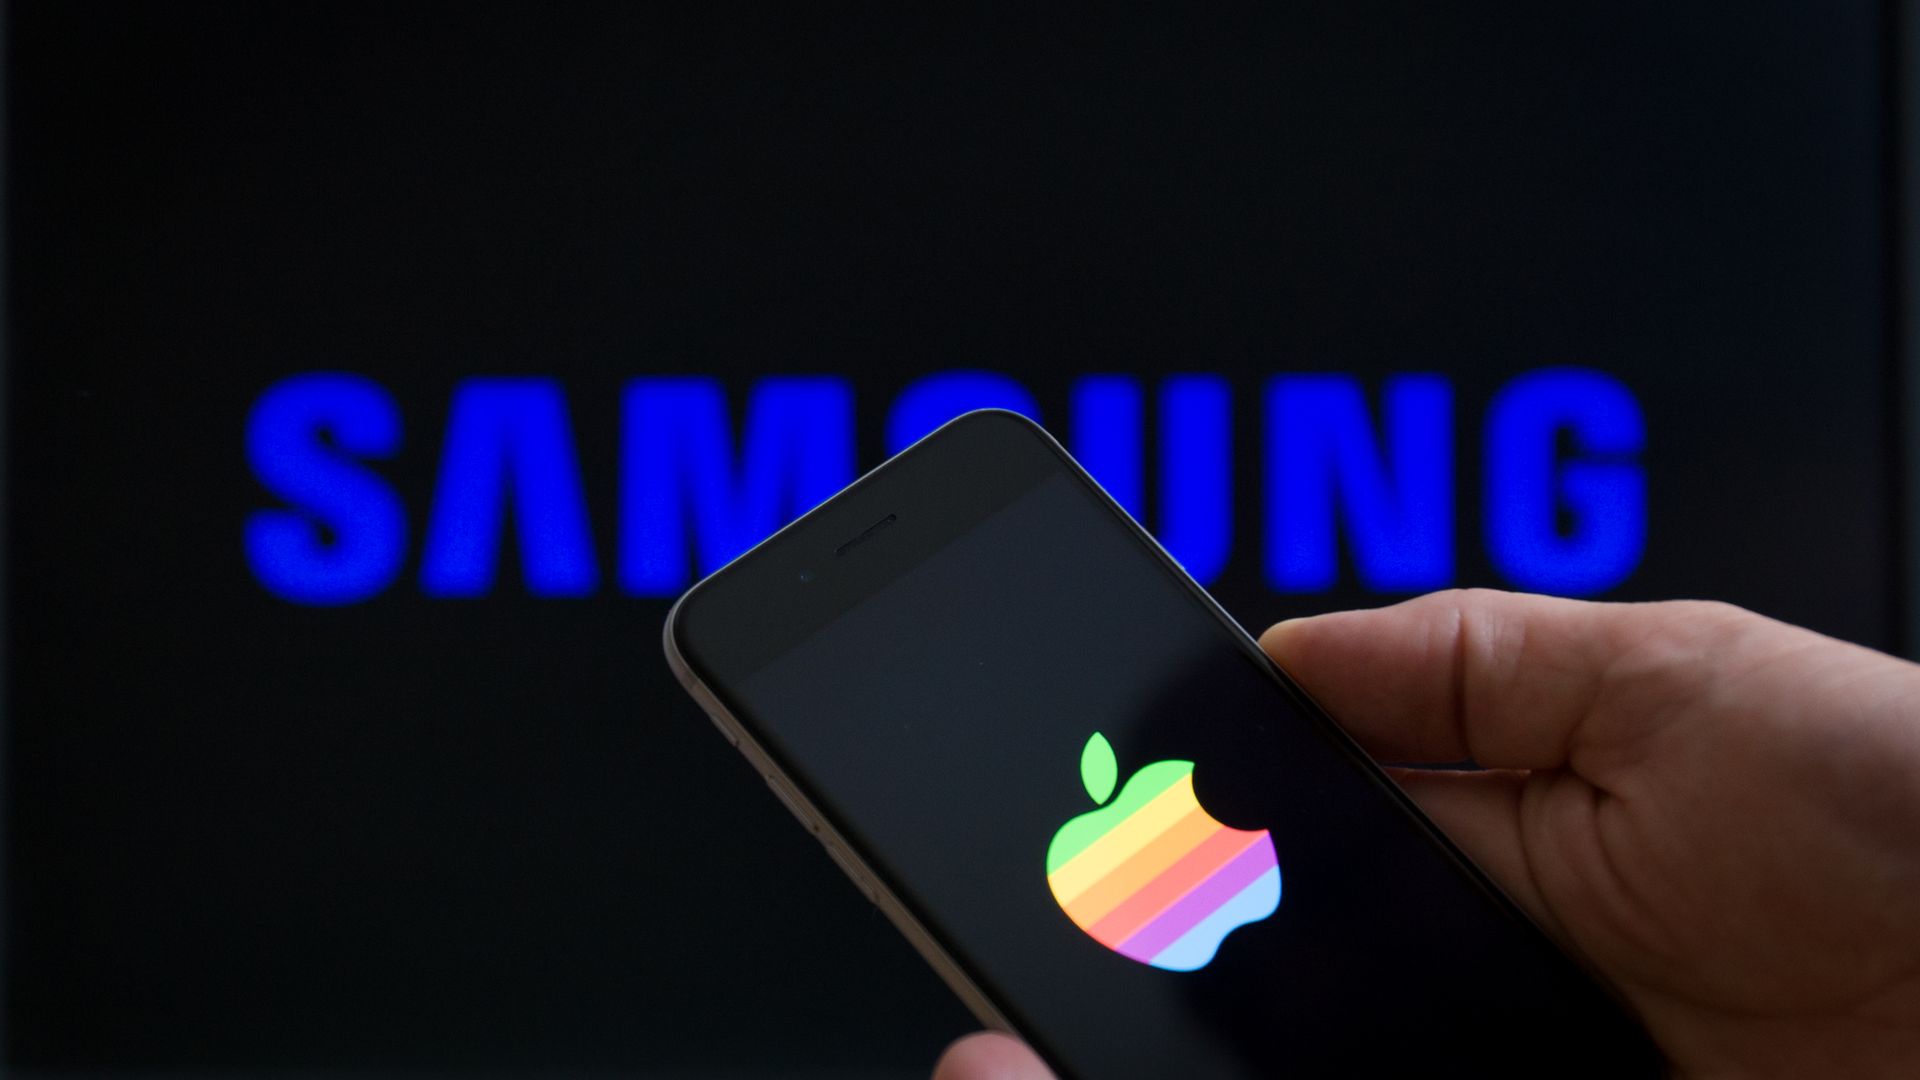 An iPhone with Apple logo on its screen under a Samsung logo sign